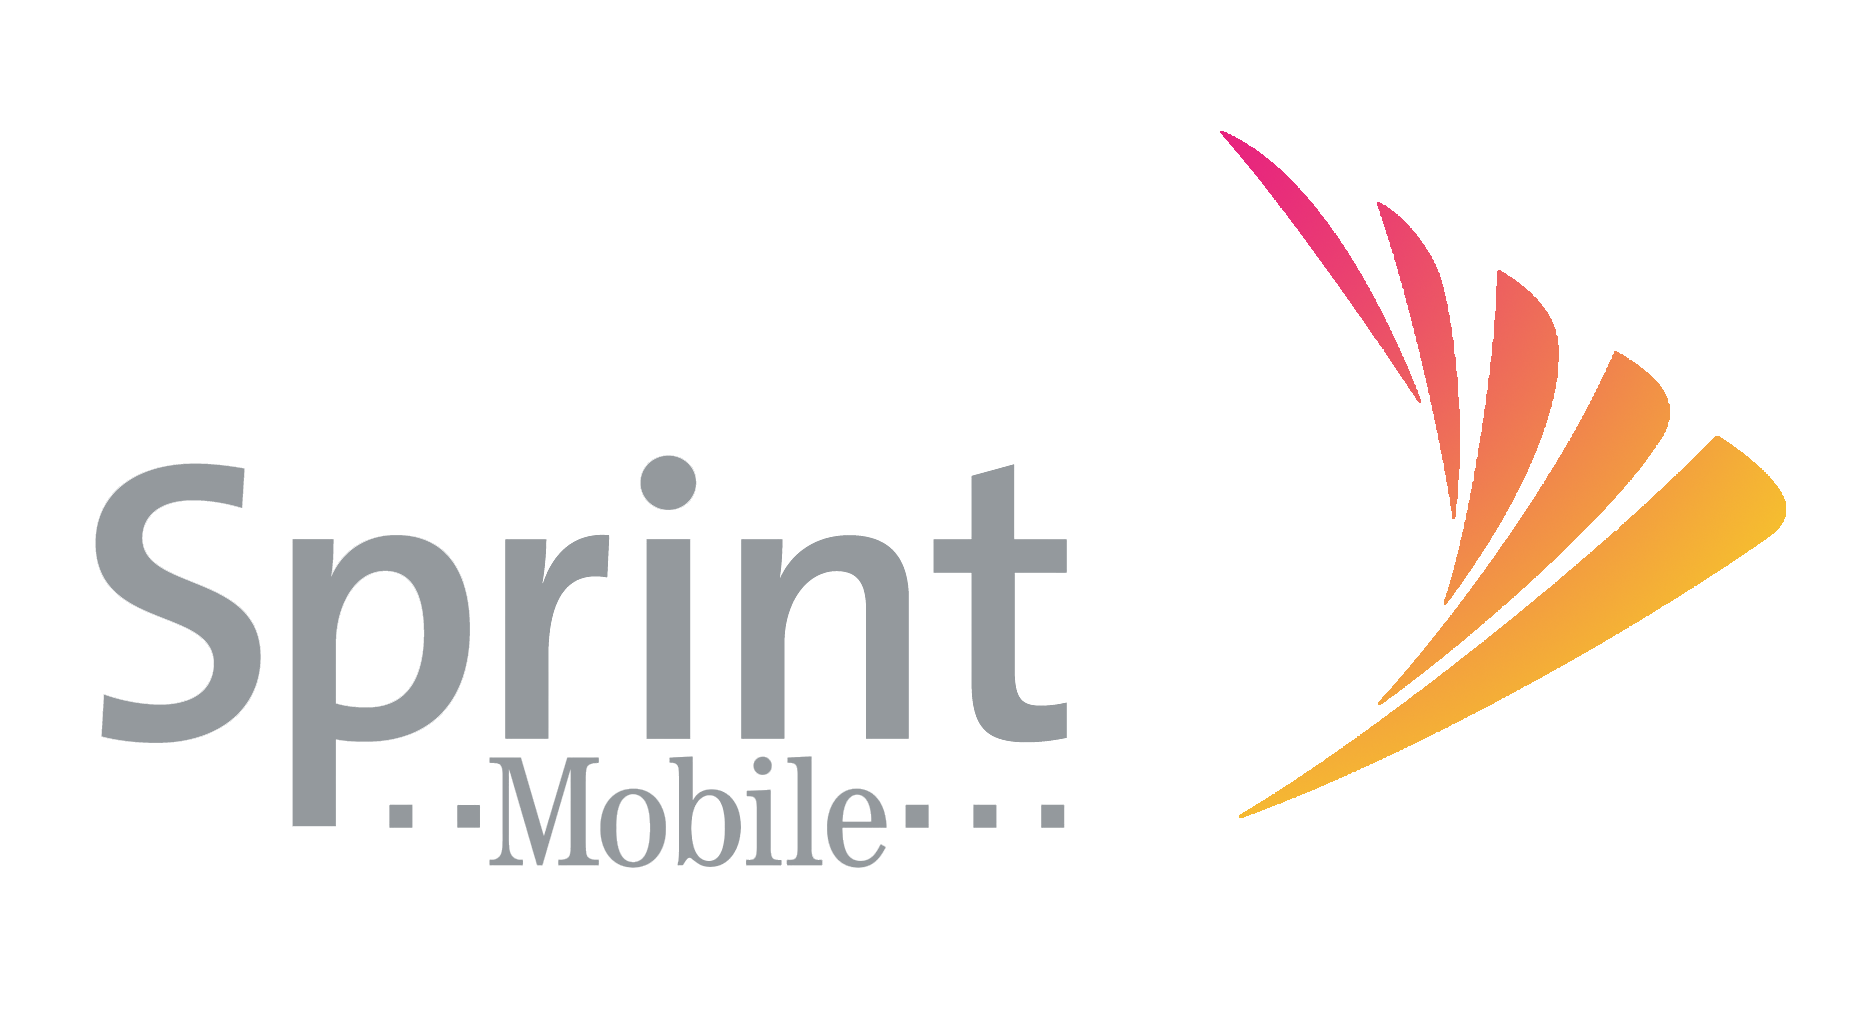 Sprint's spiral is almost over as DoJ approves T-Mobile merger